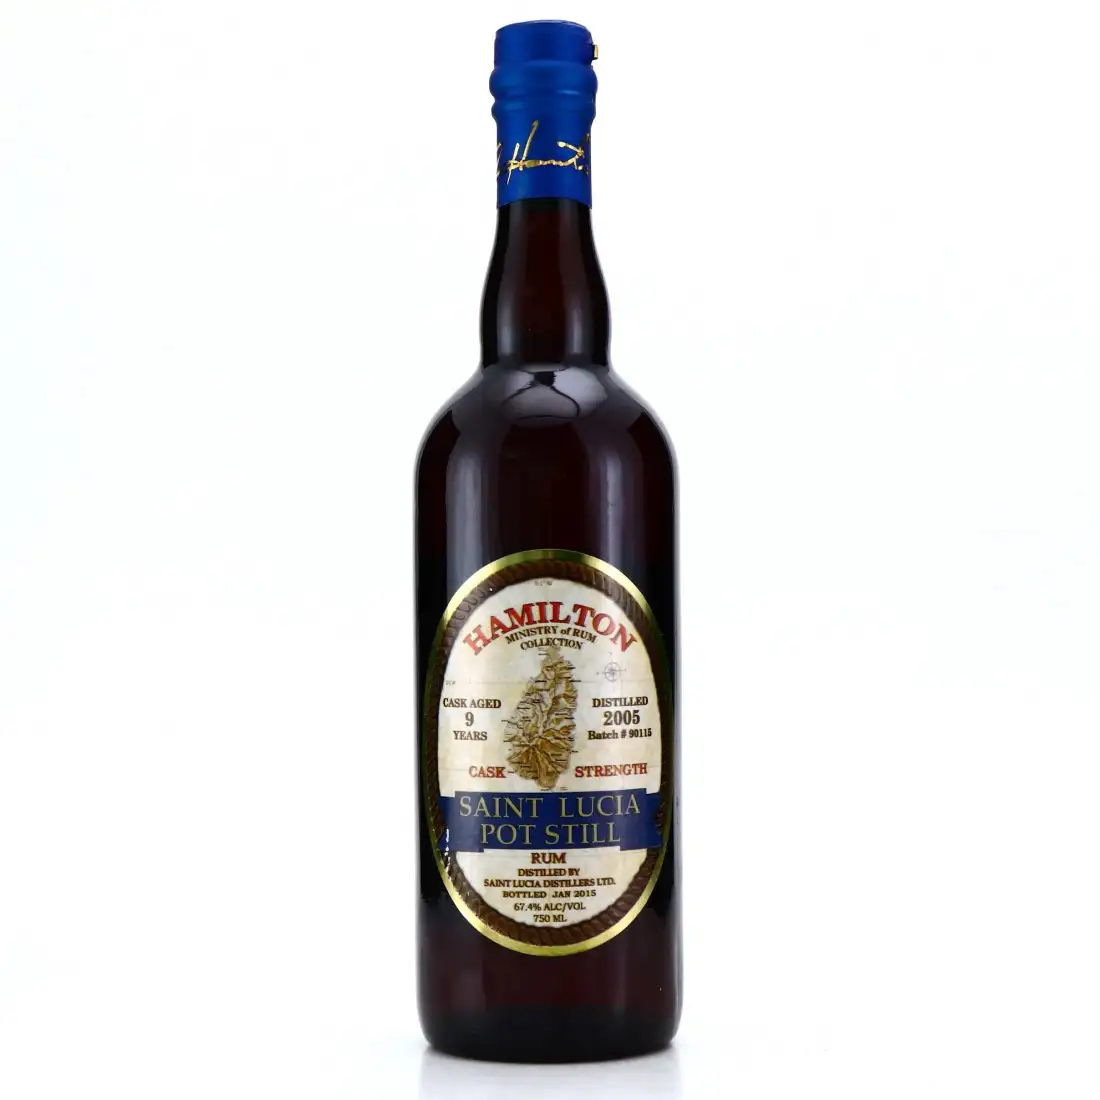 Image of the front of the bottle of the rum Hamilton Saint Lucia Pot Still